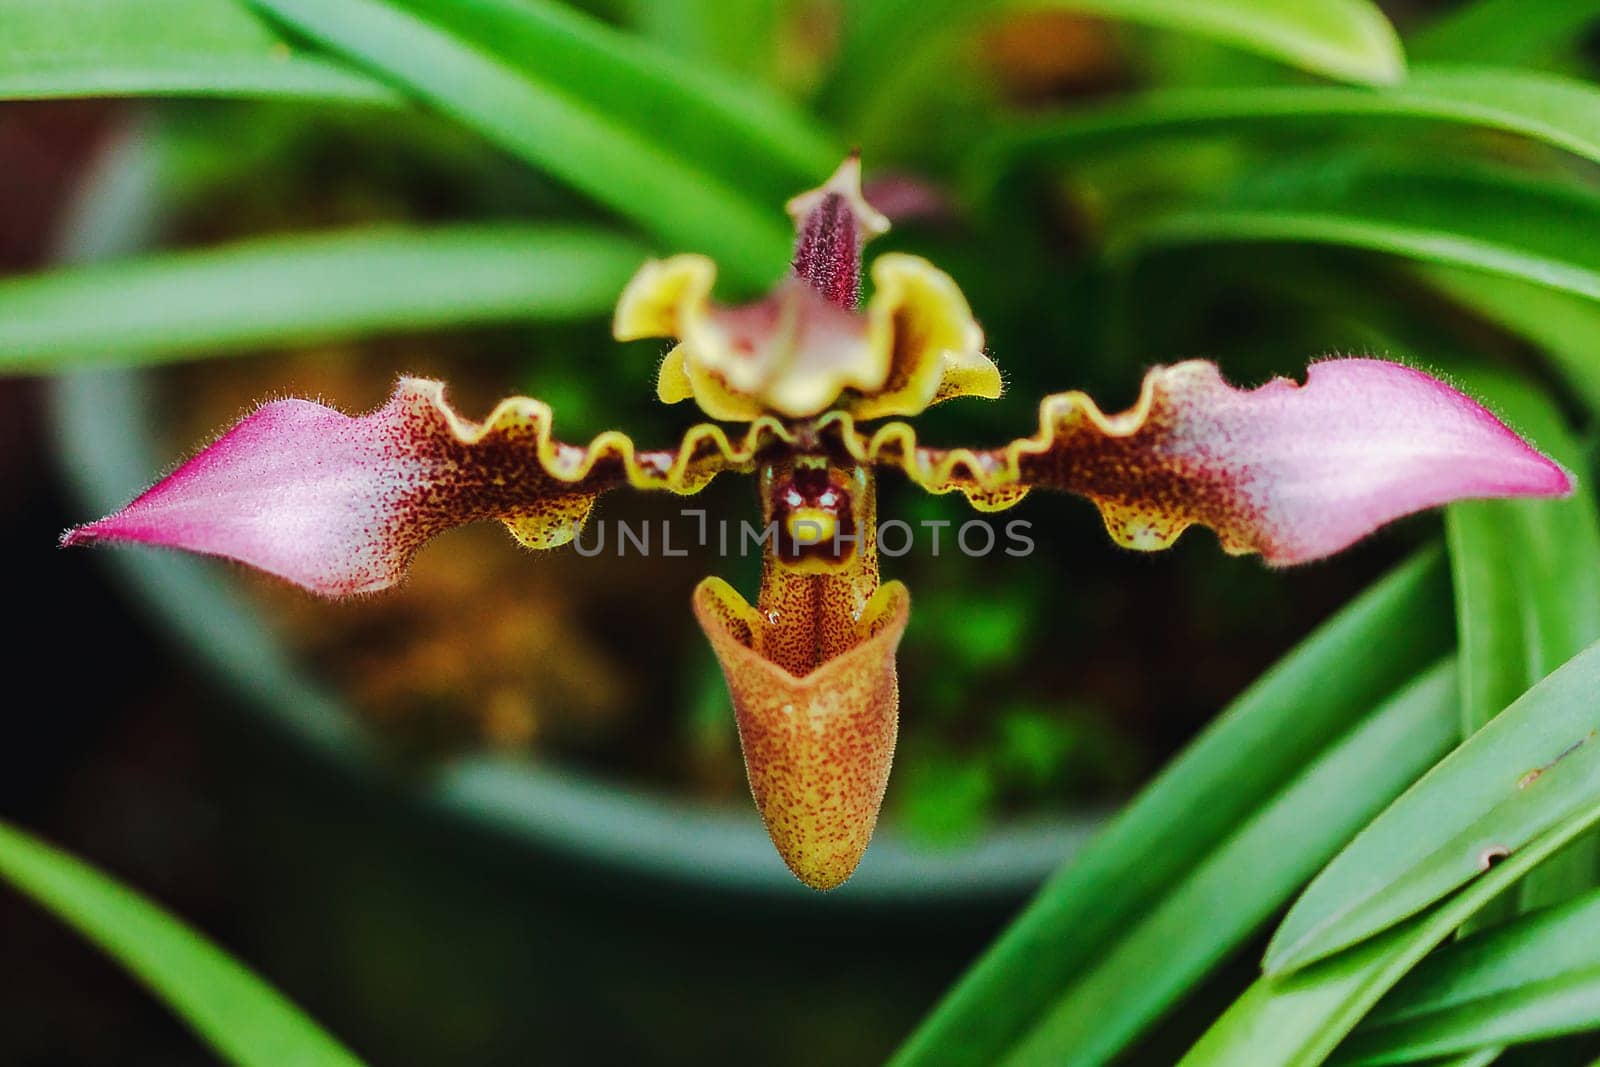 Paphiopedilum hirsutissimum Is a clay orchid Found in the crevices of the rocks or in the shade